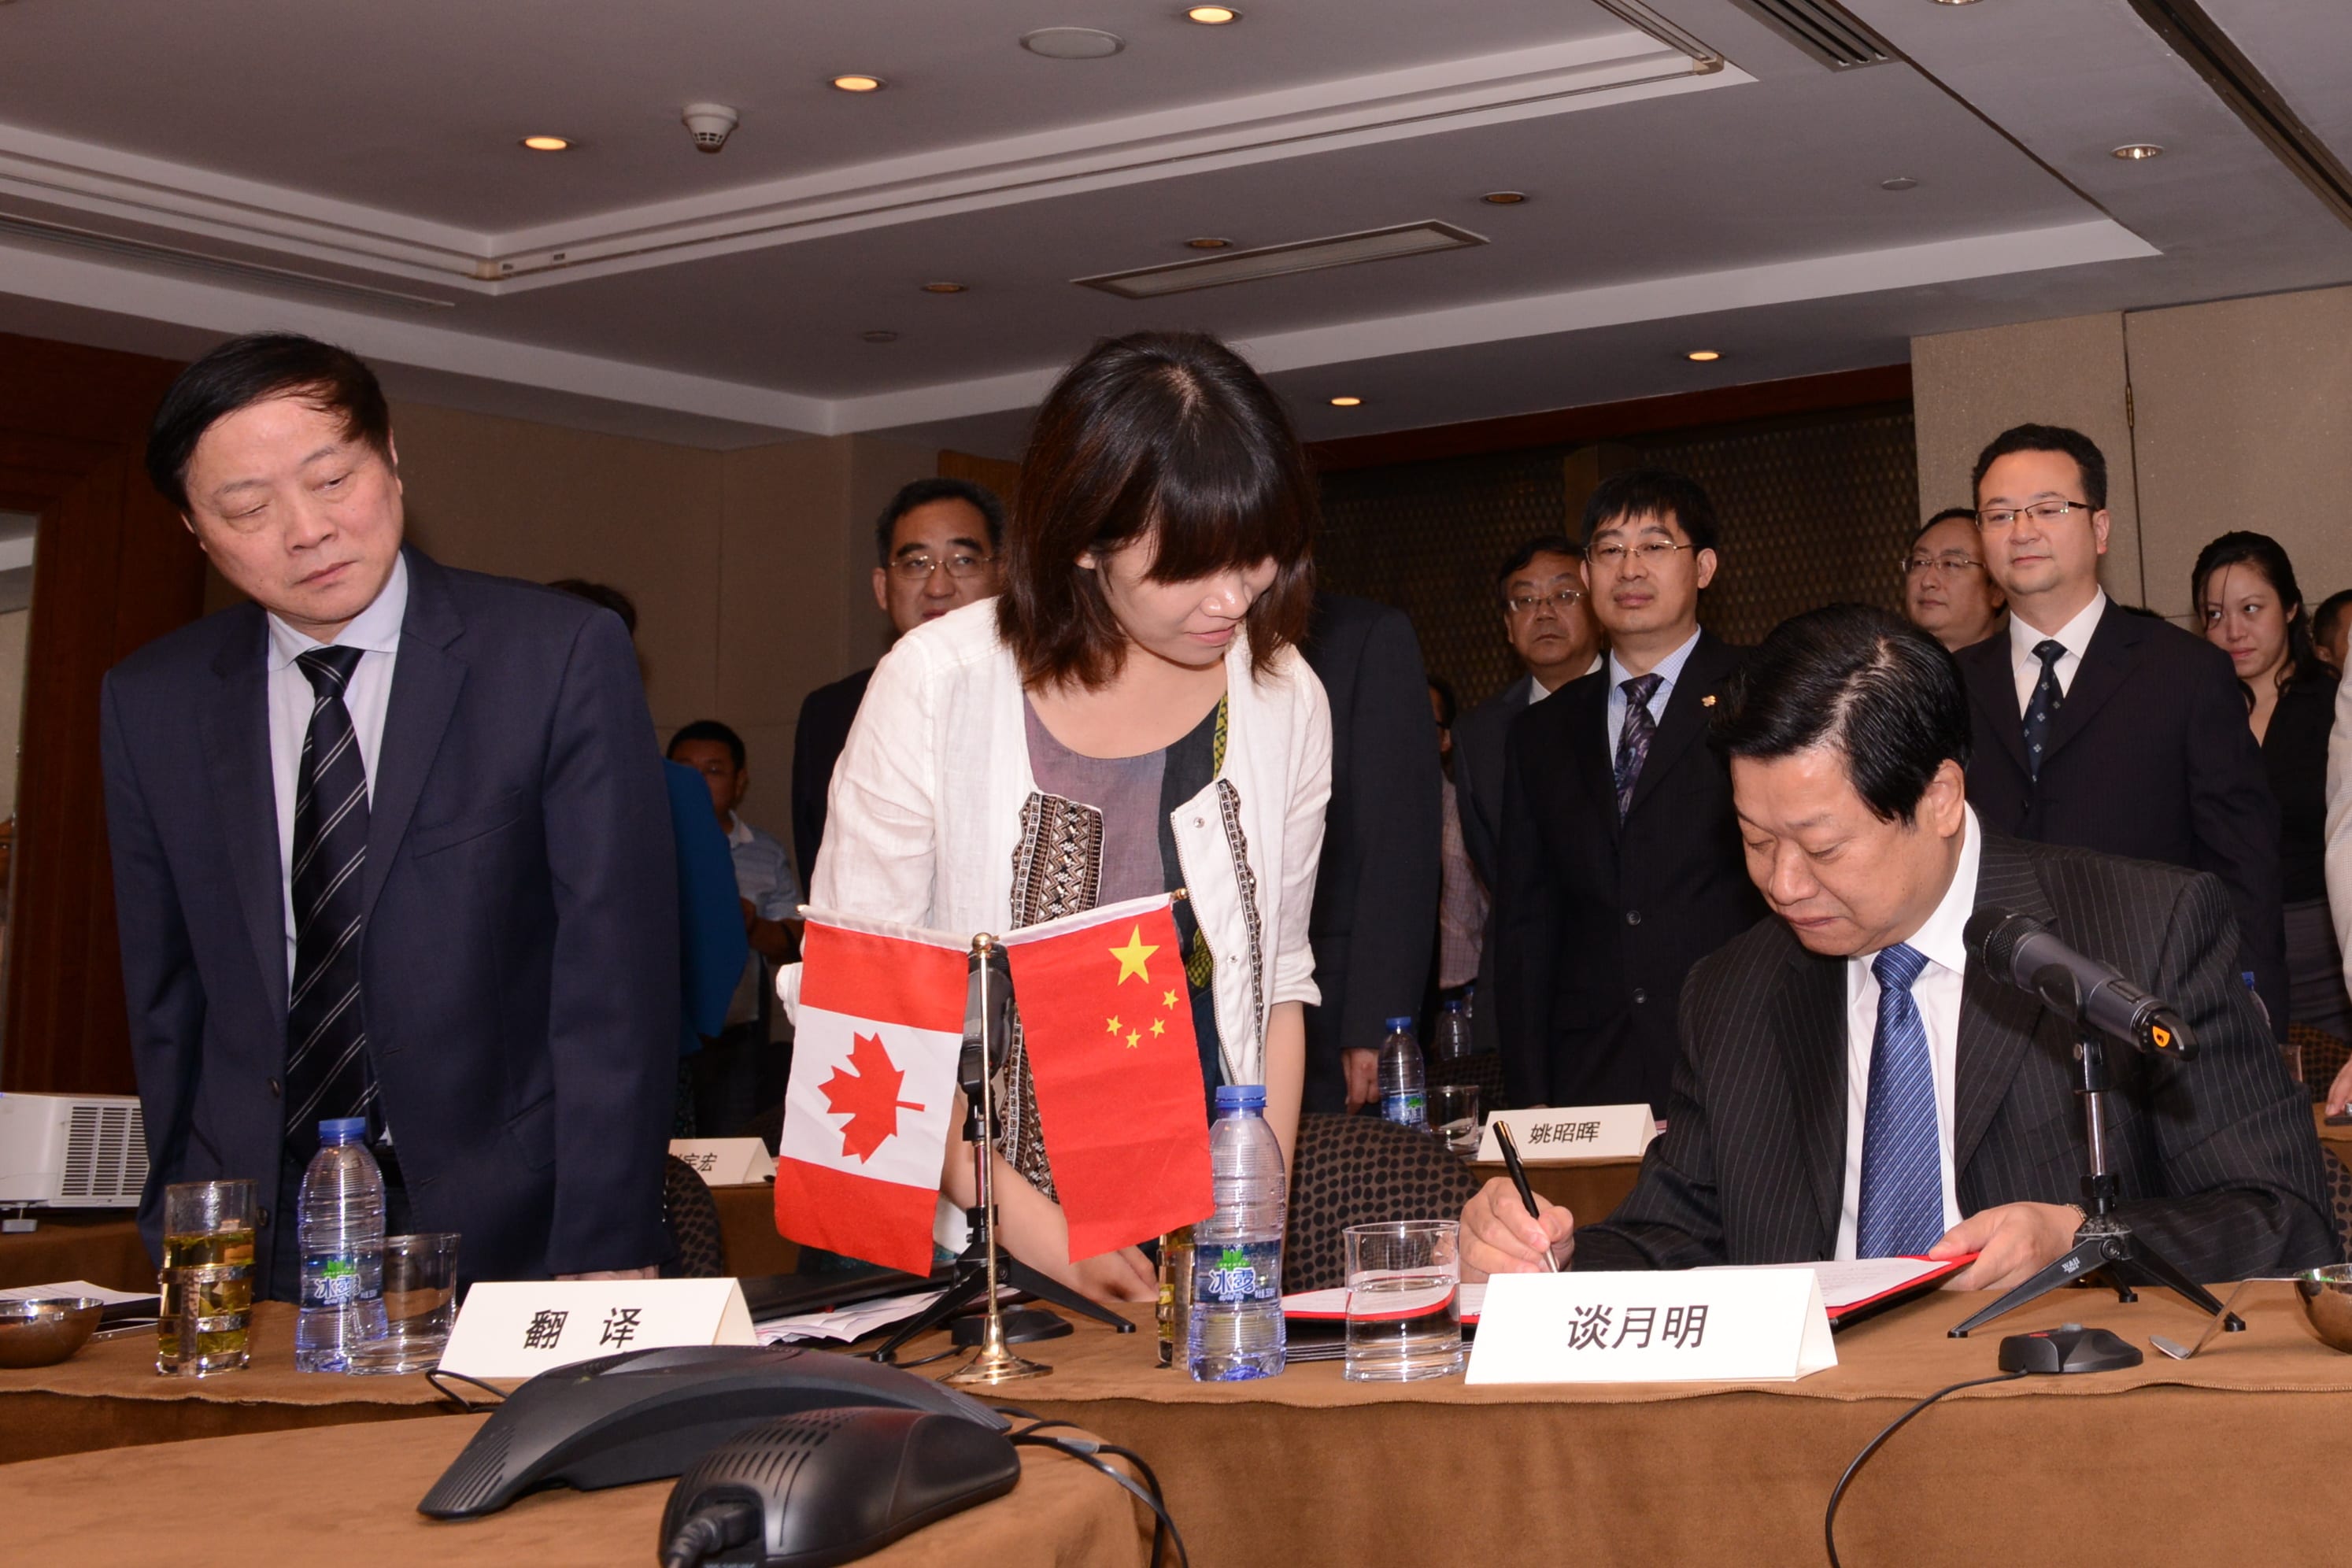 ZHEJIANG MOHURD AND BC MINISTRY OF MFLNRO SIGNS A MOU